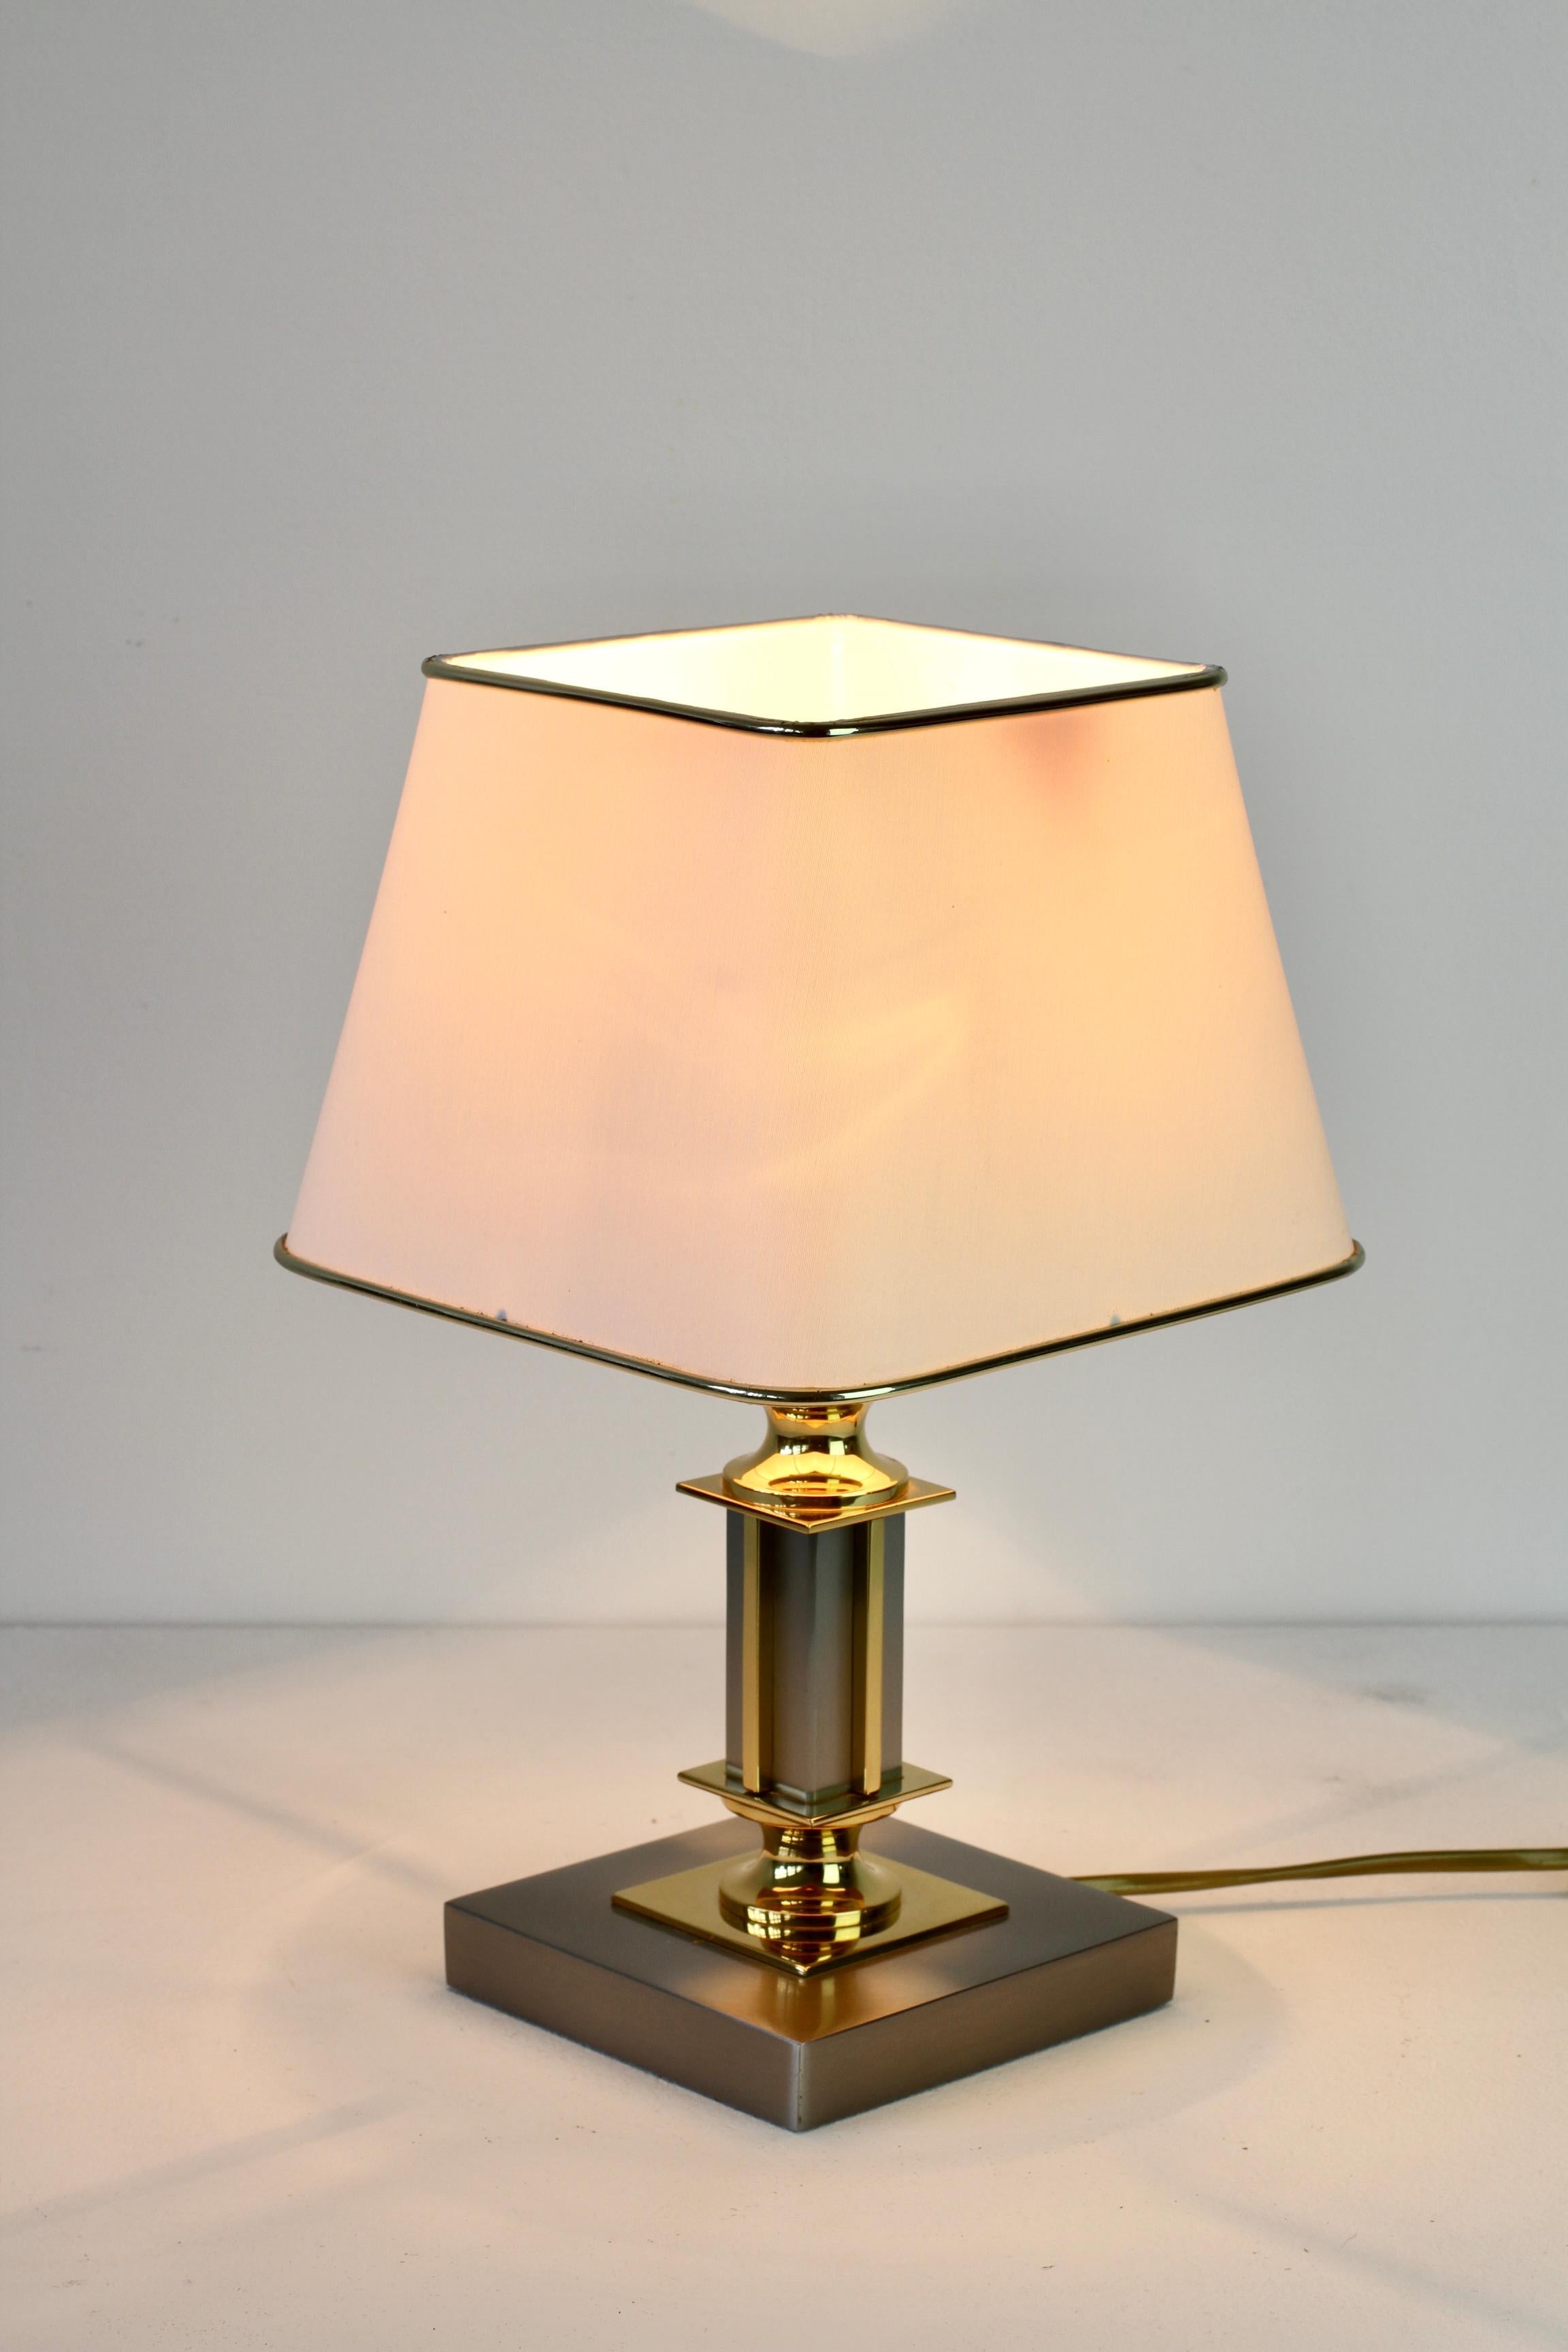 Vintage Brass & Brushed Steel Maison Jansen Style Table Desk Lamp, circa 1980s For Sale 6